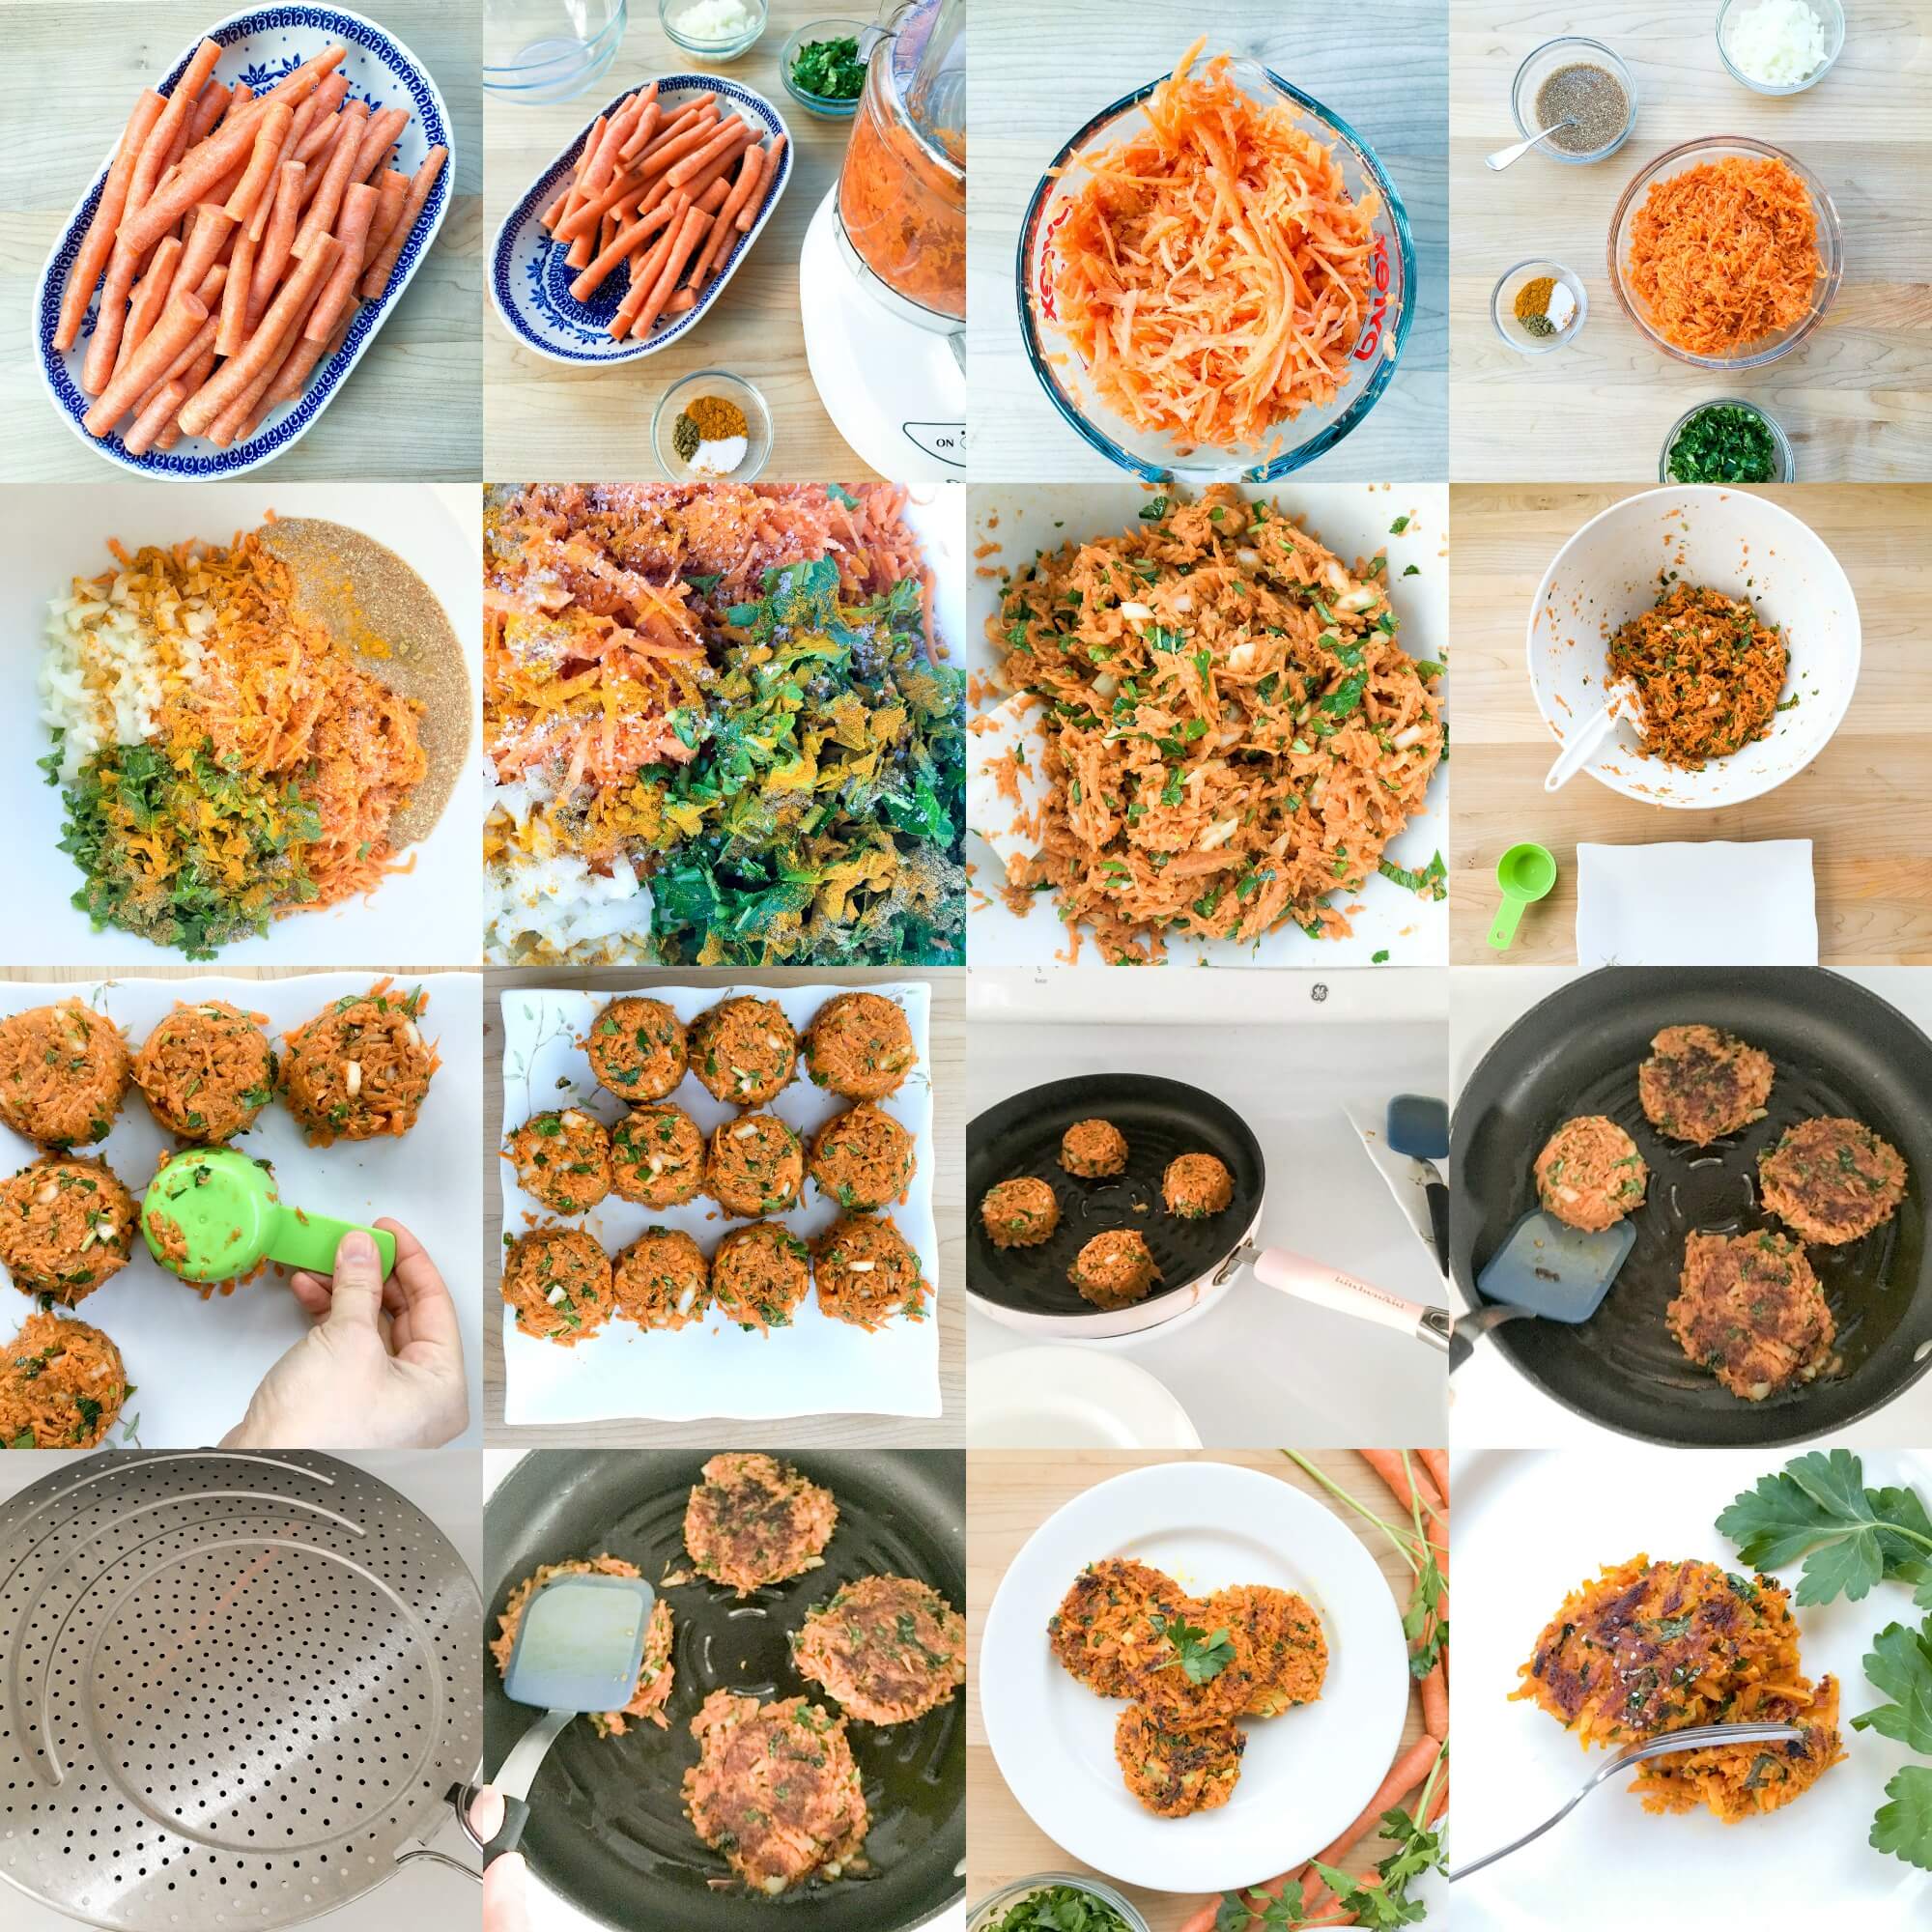 Turmeric Carrot Fritters (V + GF) are a healthier, gluten-free addition to any brunch, lunch or dinner. Tender fritters packed with vitamin-rich carrots, anti-inflammatory turmeric, ground flaxseed and Italian parsley these complimentary flavors are both healthy and delicious! Check out #FoodieMamas 8 mouthwatering carrot recipes!